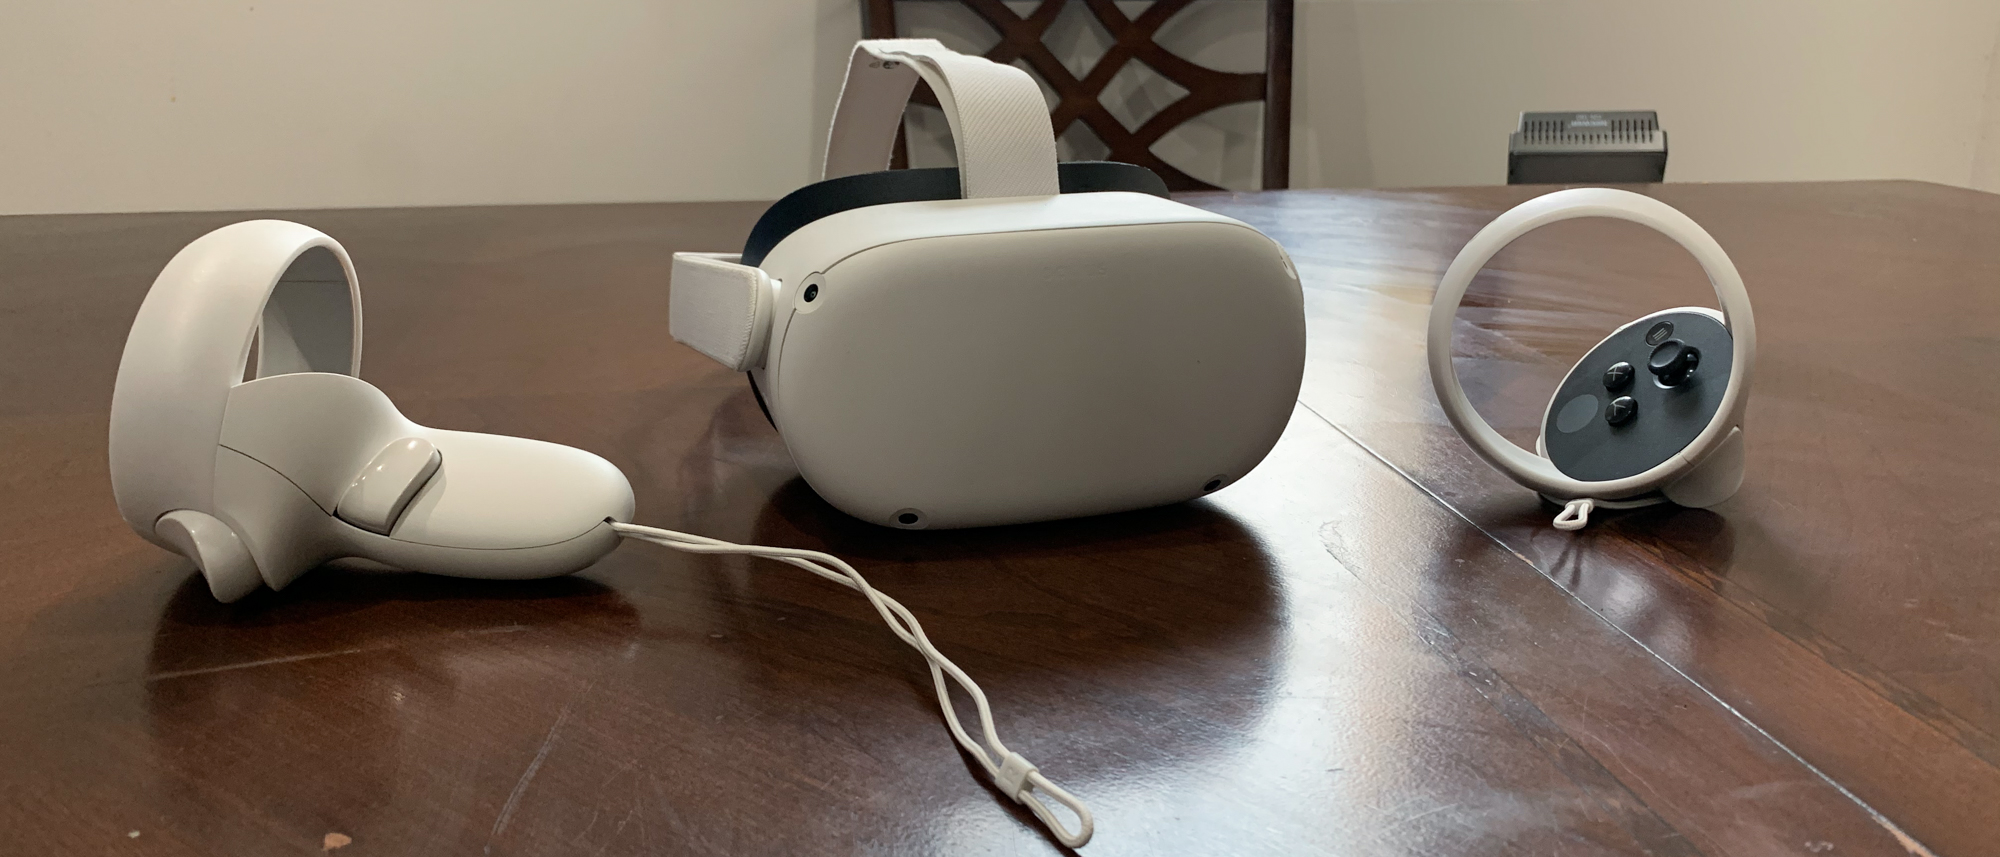 Meta Quest 2 review: The affordable VR headset we've been waiting